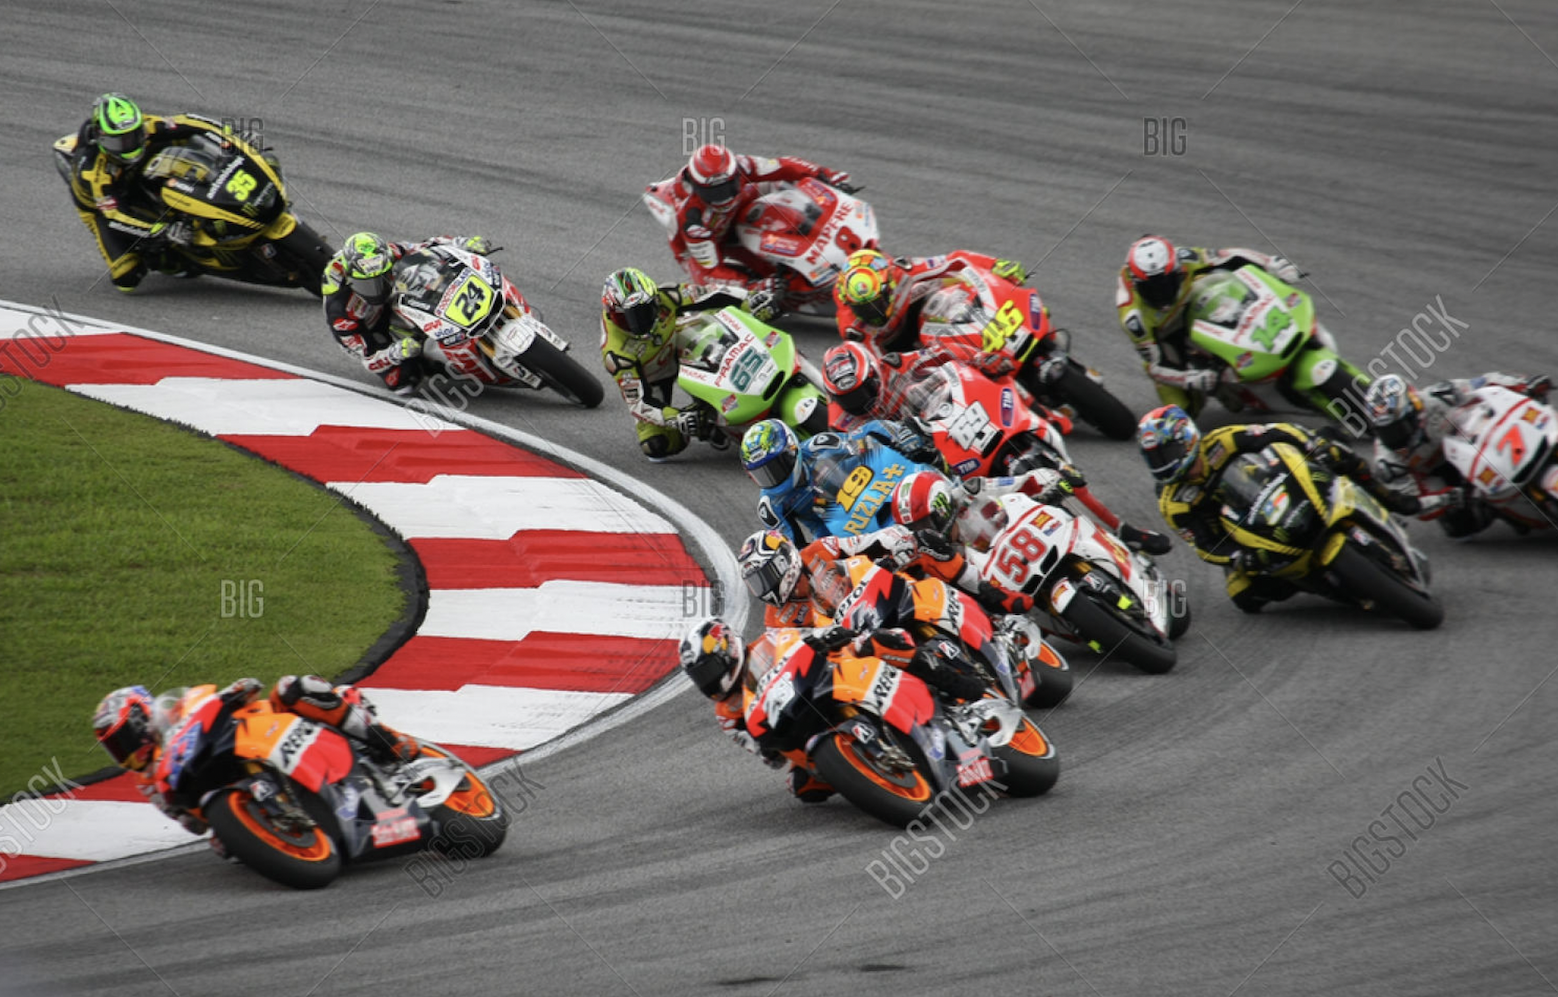 This image may seem quite insignificant, but this was Marco Simoncelli’s (#58, white and red motorcycle in the middle of the pack), in his  last race. It’s on YouTube and there are plenty of articles about it, but there was a crash and his helmet came off. His good friend, Valentino Rossi (also in that shot, #46) was unable to avoid him. Ten years ago this year, still one of the most horrific live sporting events I have witnessed.